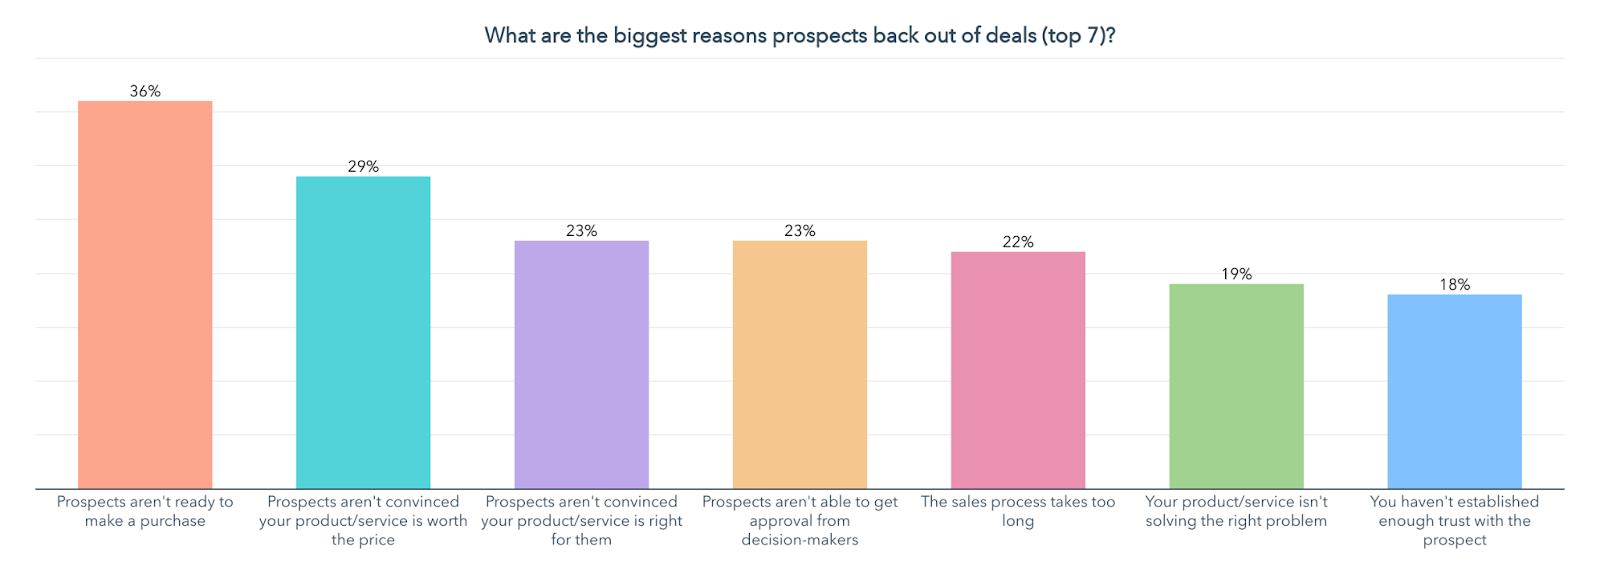 top reasons prospects back out of deals